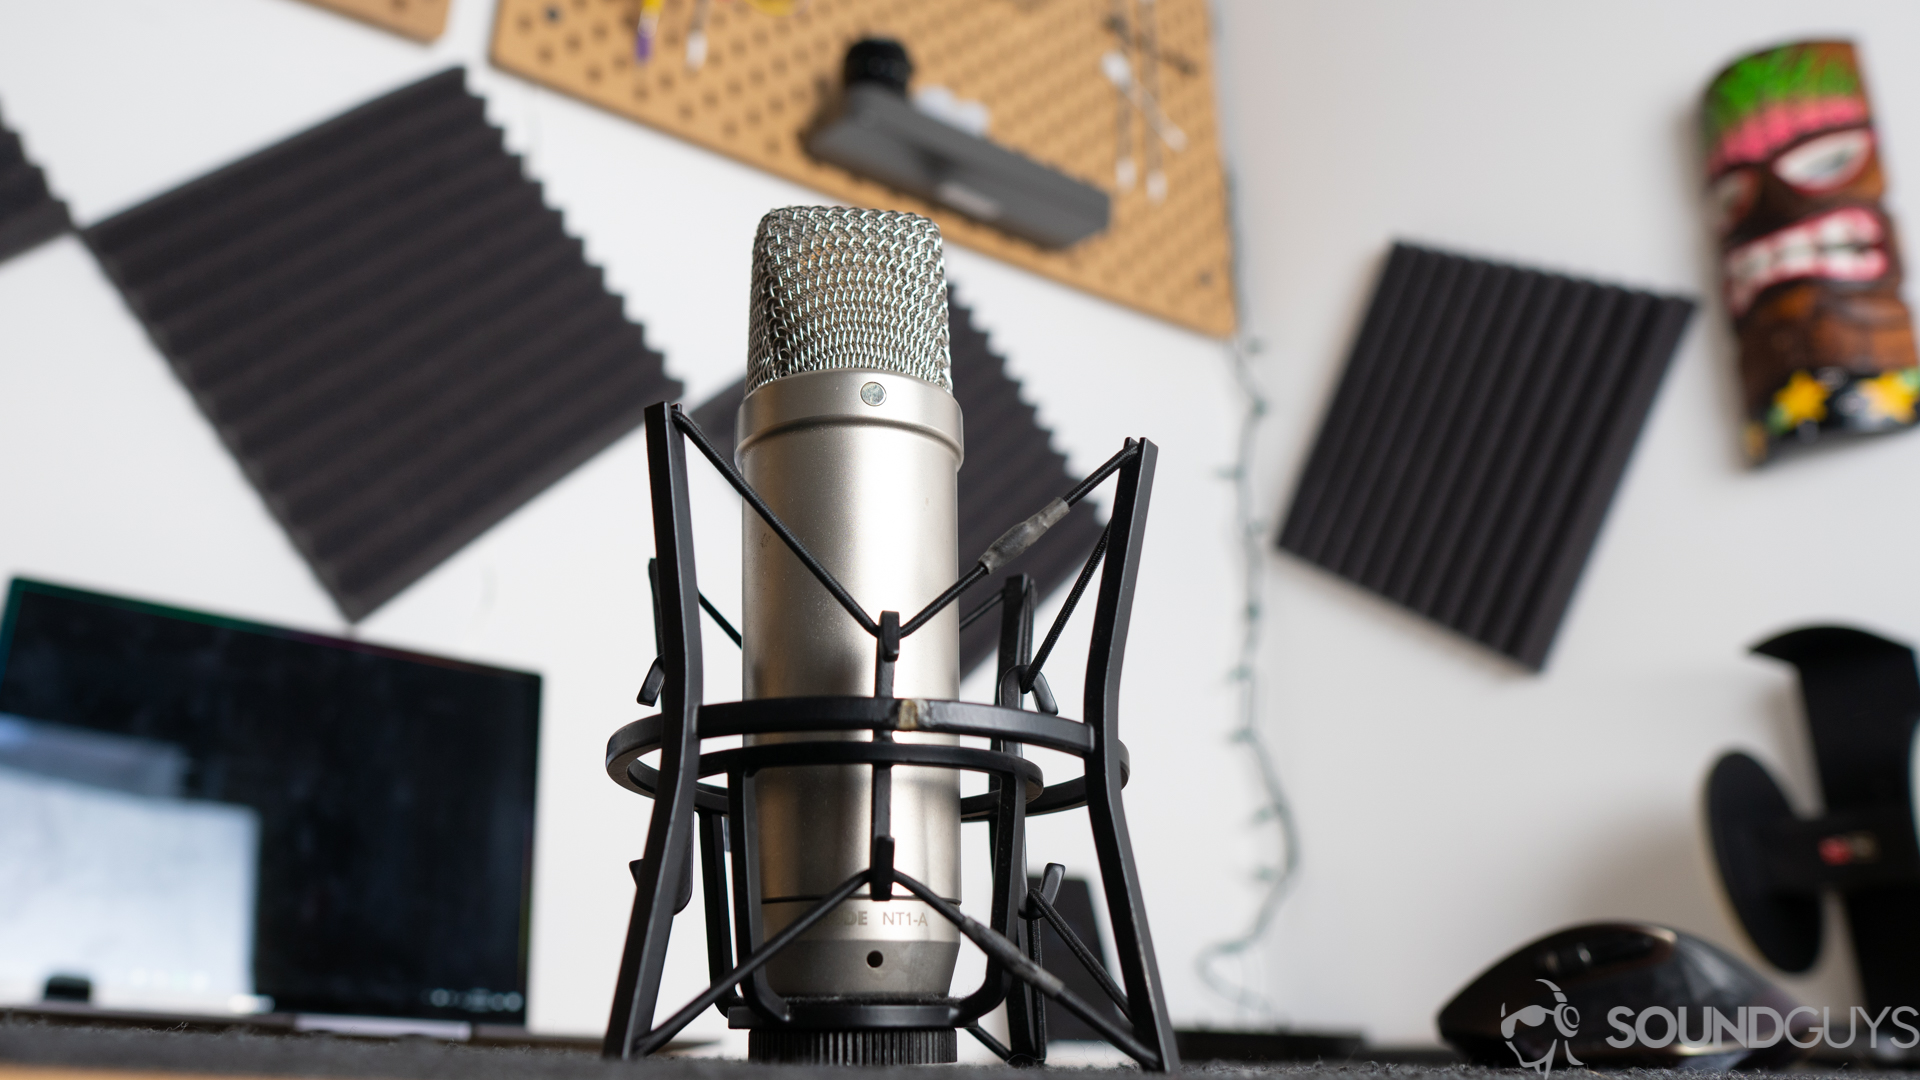 Rode NT1-A Best Studio Condenser Microphone (Full Review) (NT1-A), by  Arotkhana